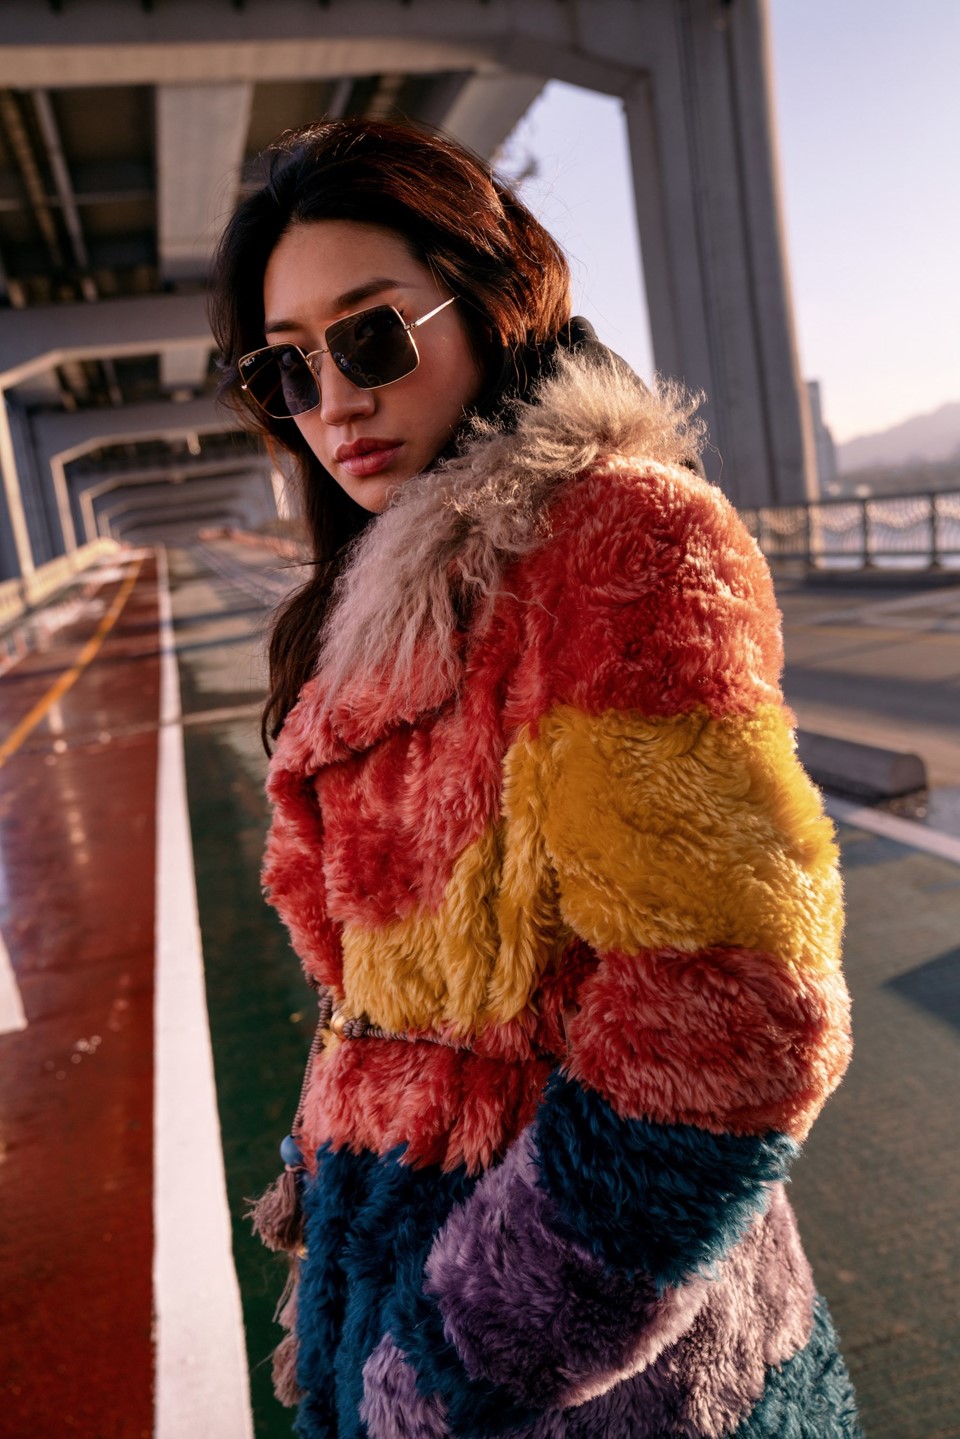 Peggy Gou has designed her own collection of sunglasses